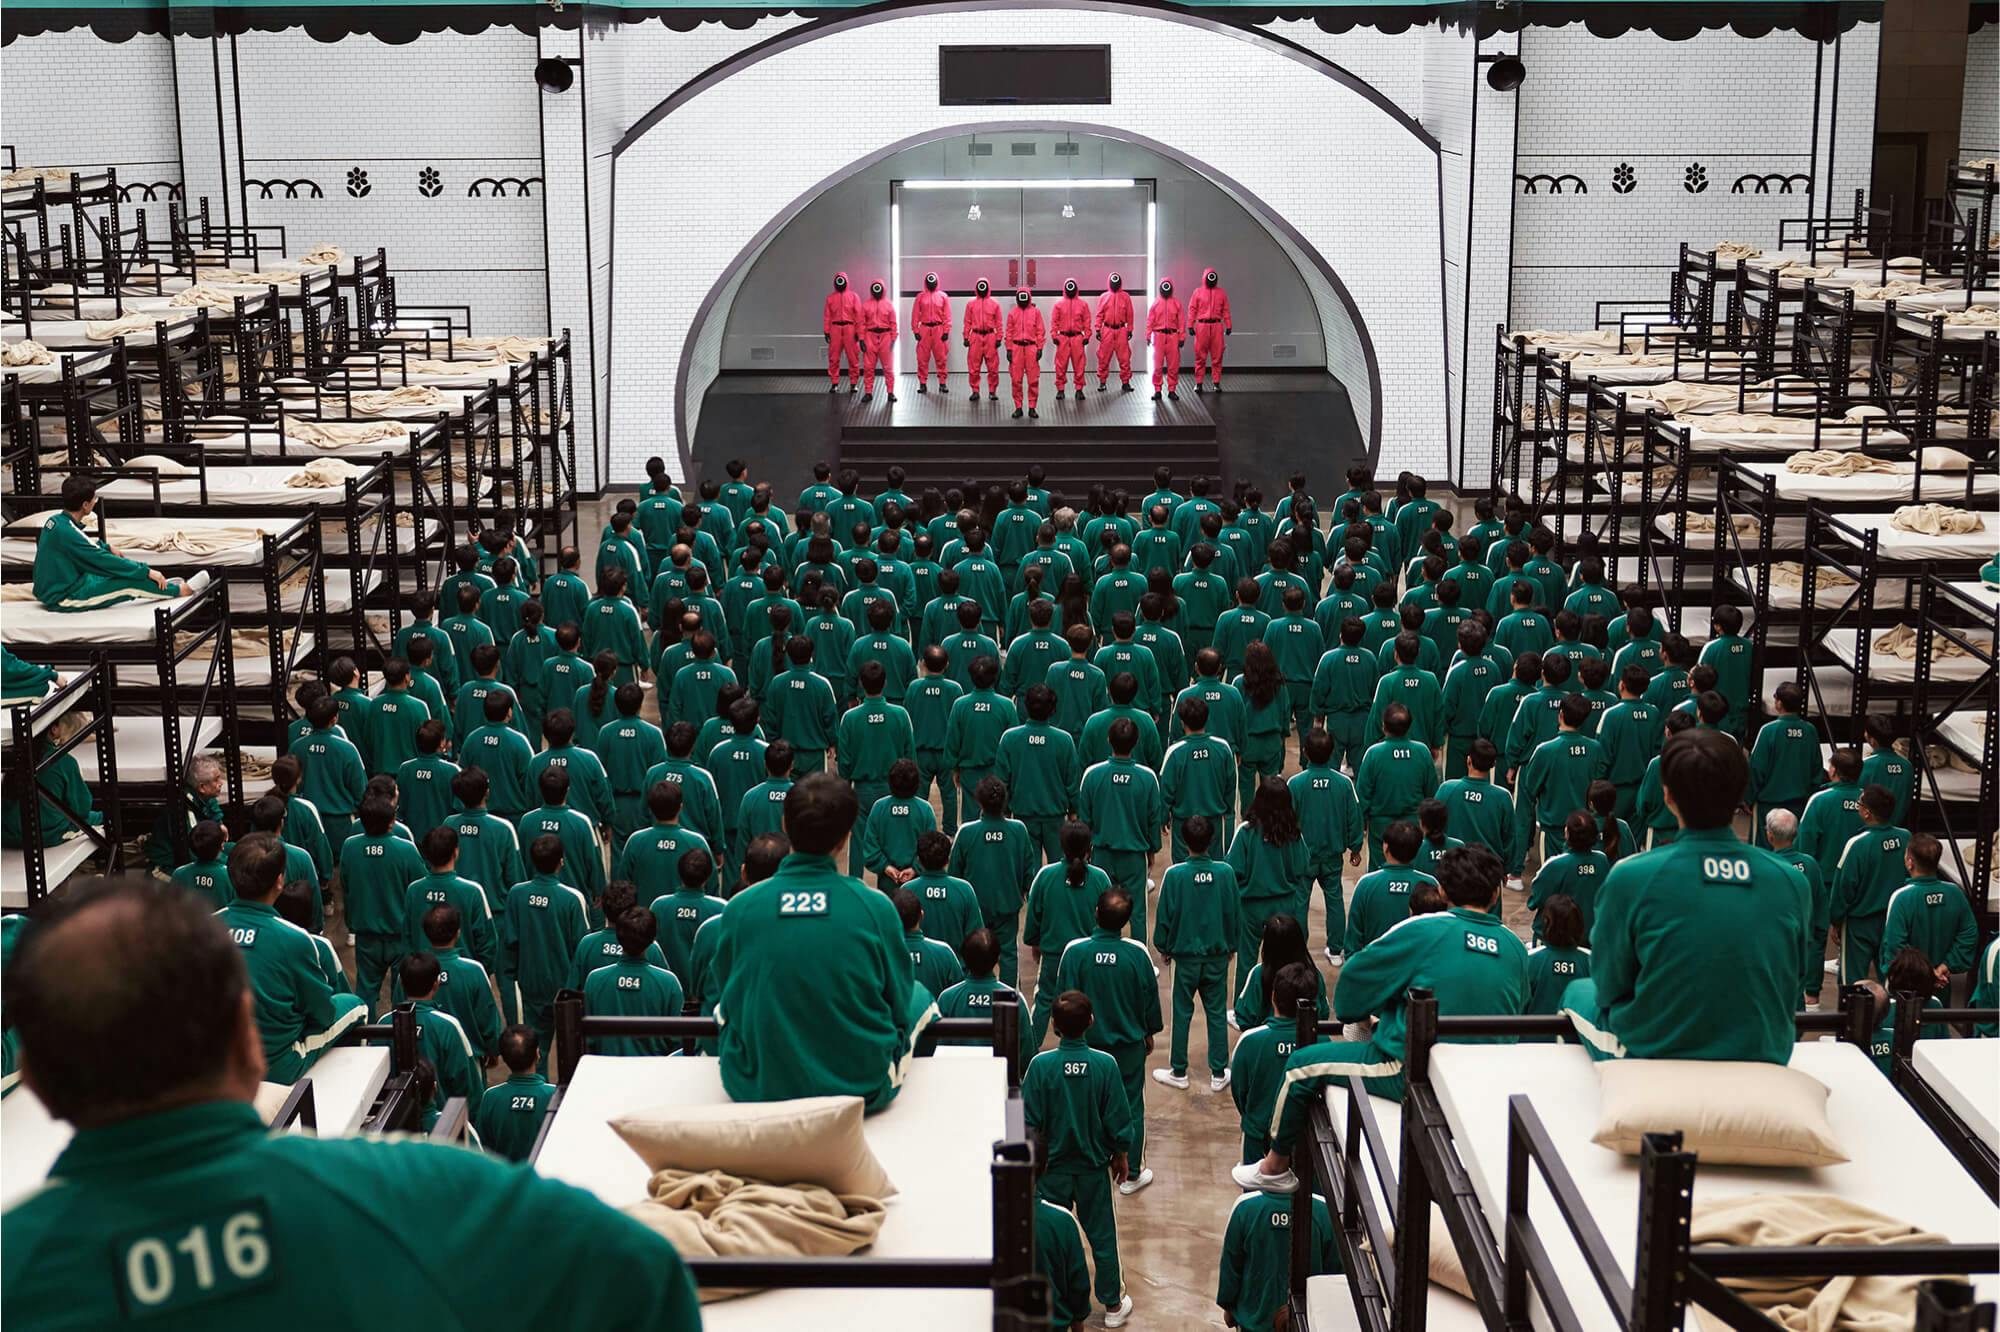 A shot of one of the halls in Squid Game. 456 players line up in green tracksuits labeled with their numbers, facing a stage of red-clothed people wearing black masks.